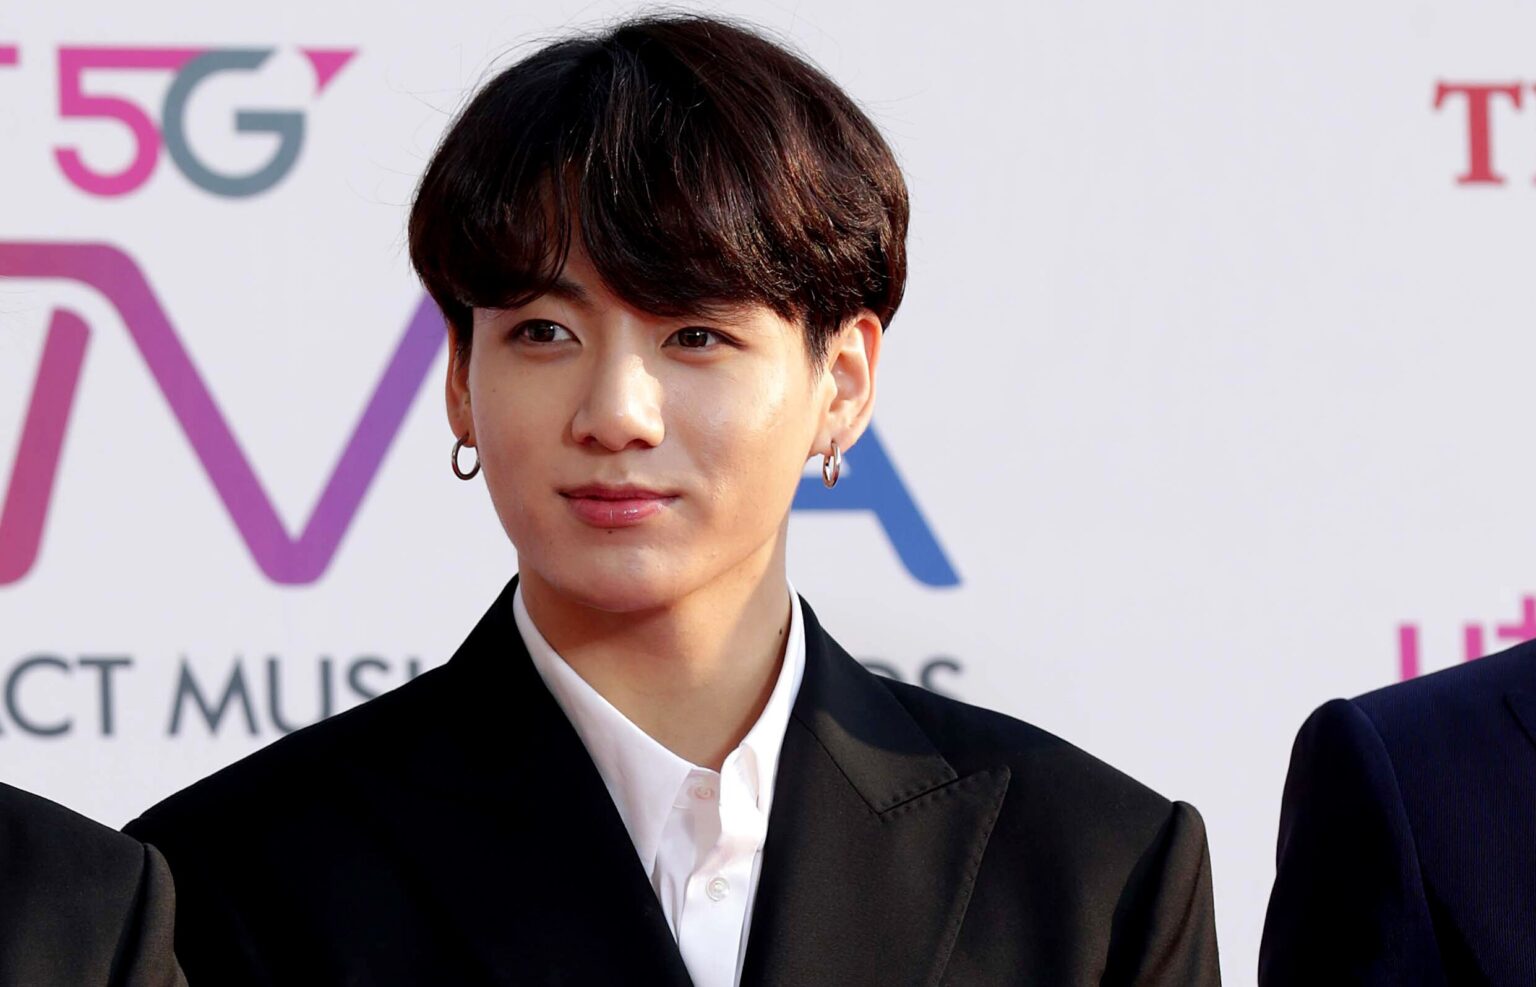 BTS ARMY, do you stan Jungkook? Like everyone, Jungkook is afraid of something. Learn about his fears and phobias here.